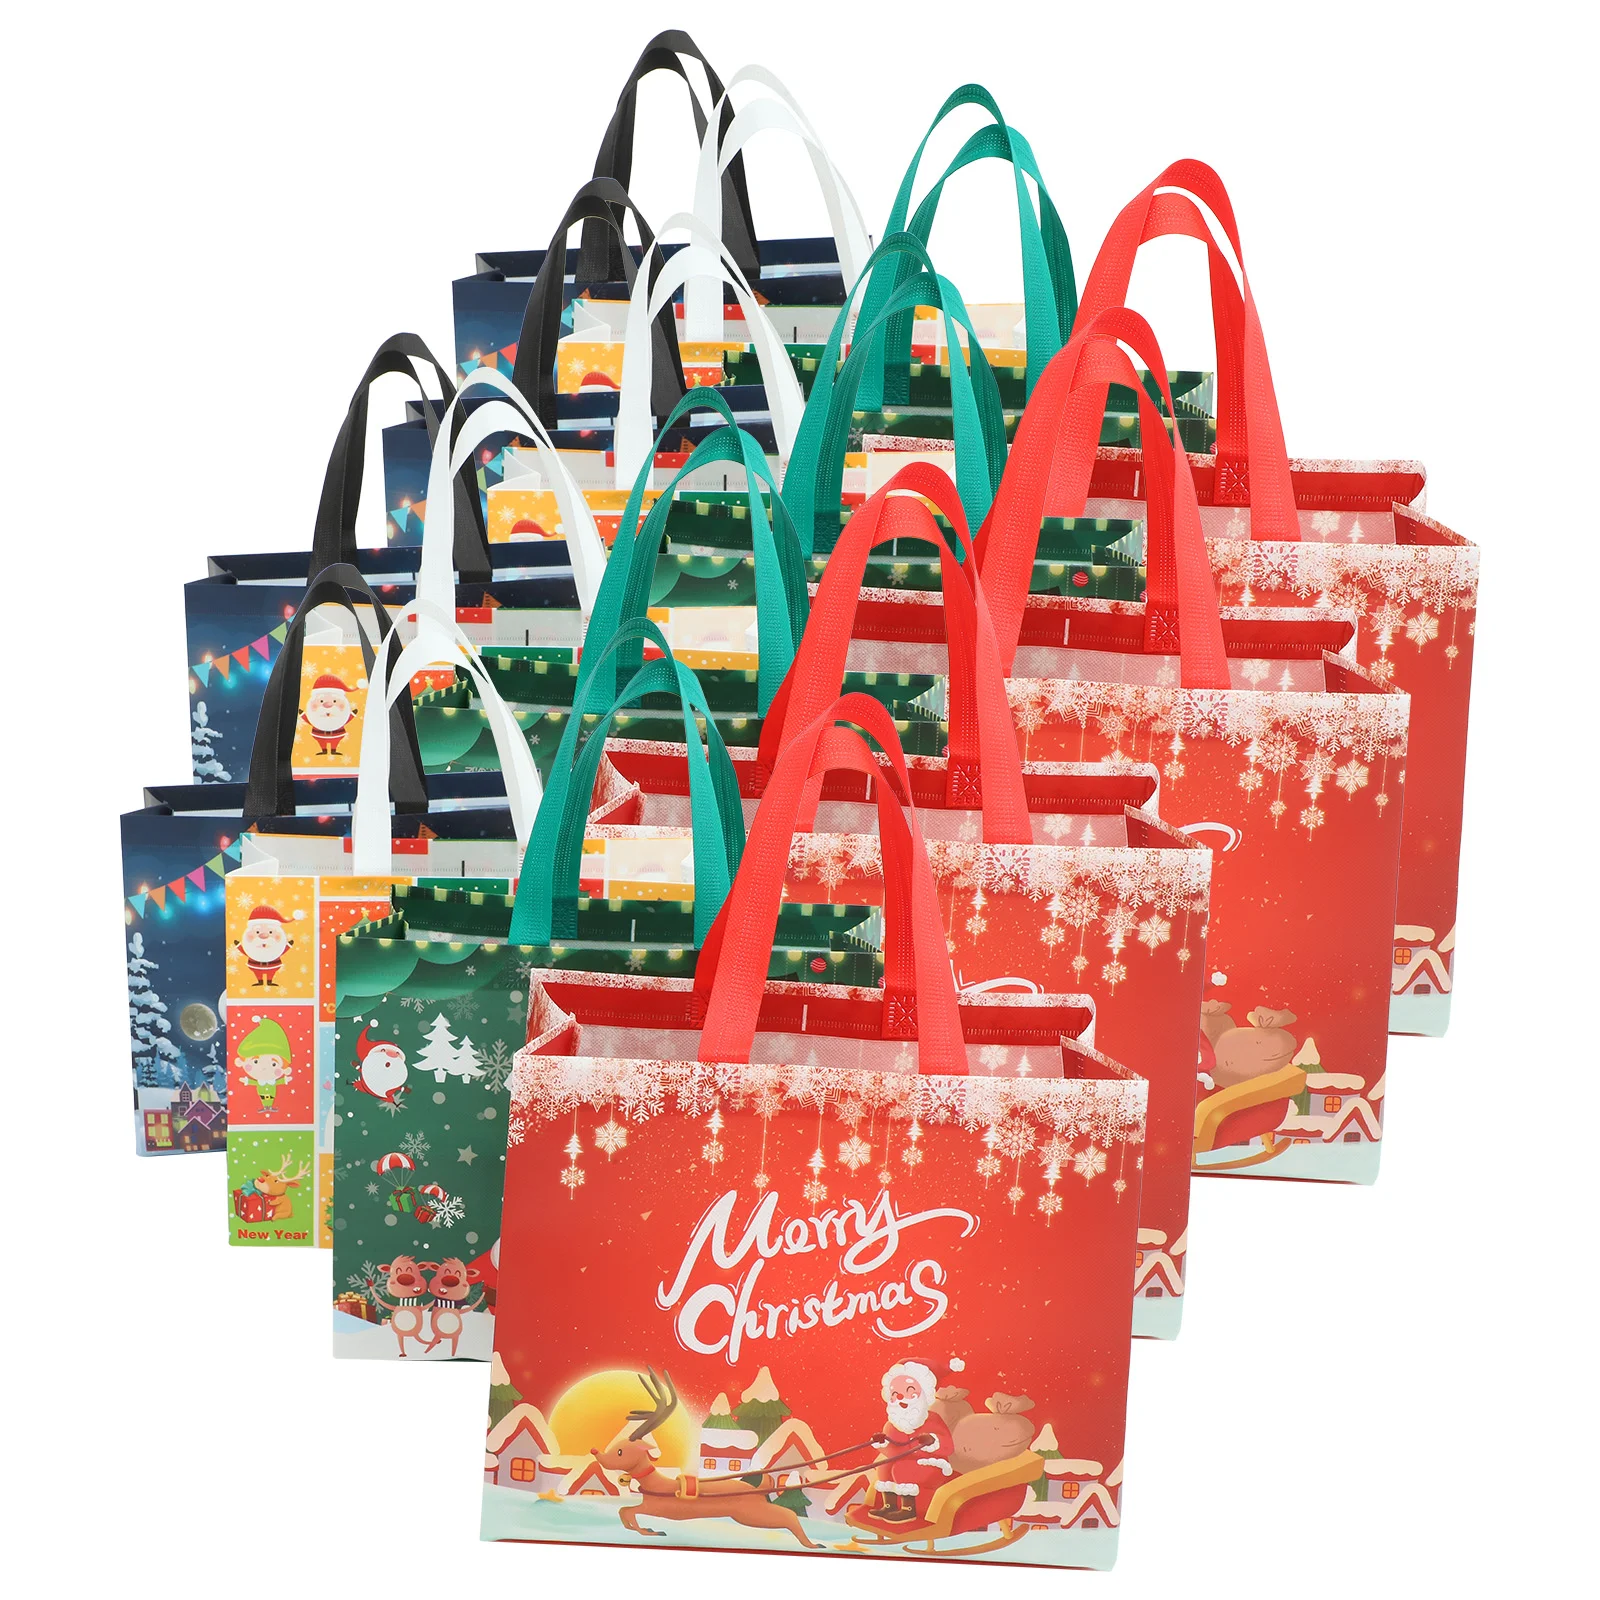 

16pcs Christmas Wrapping Bags Gift Storage Pouches Reusable Grocery Tote Shopping Bags Xmas Bags